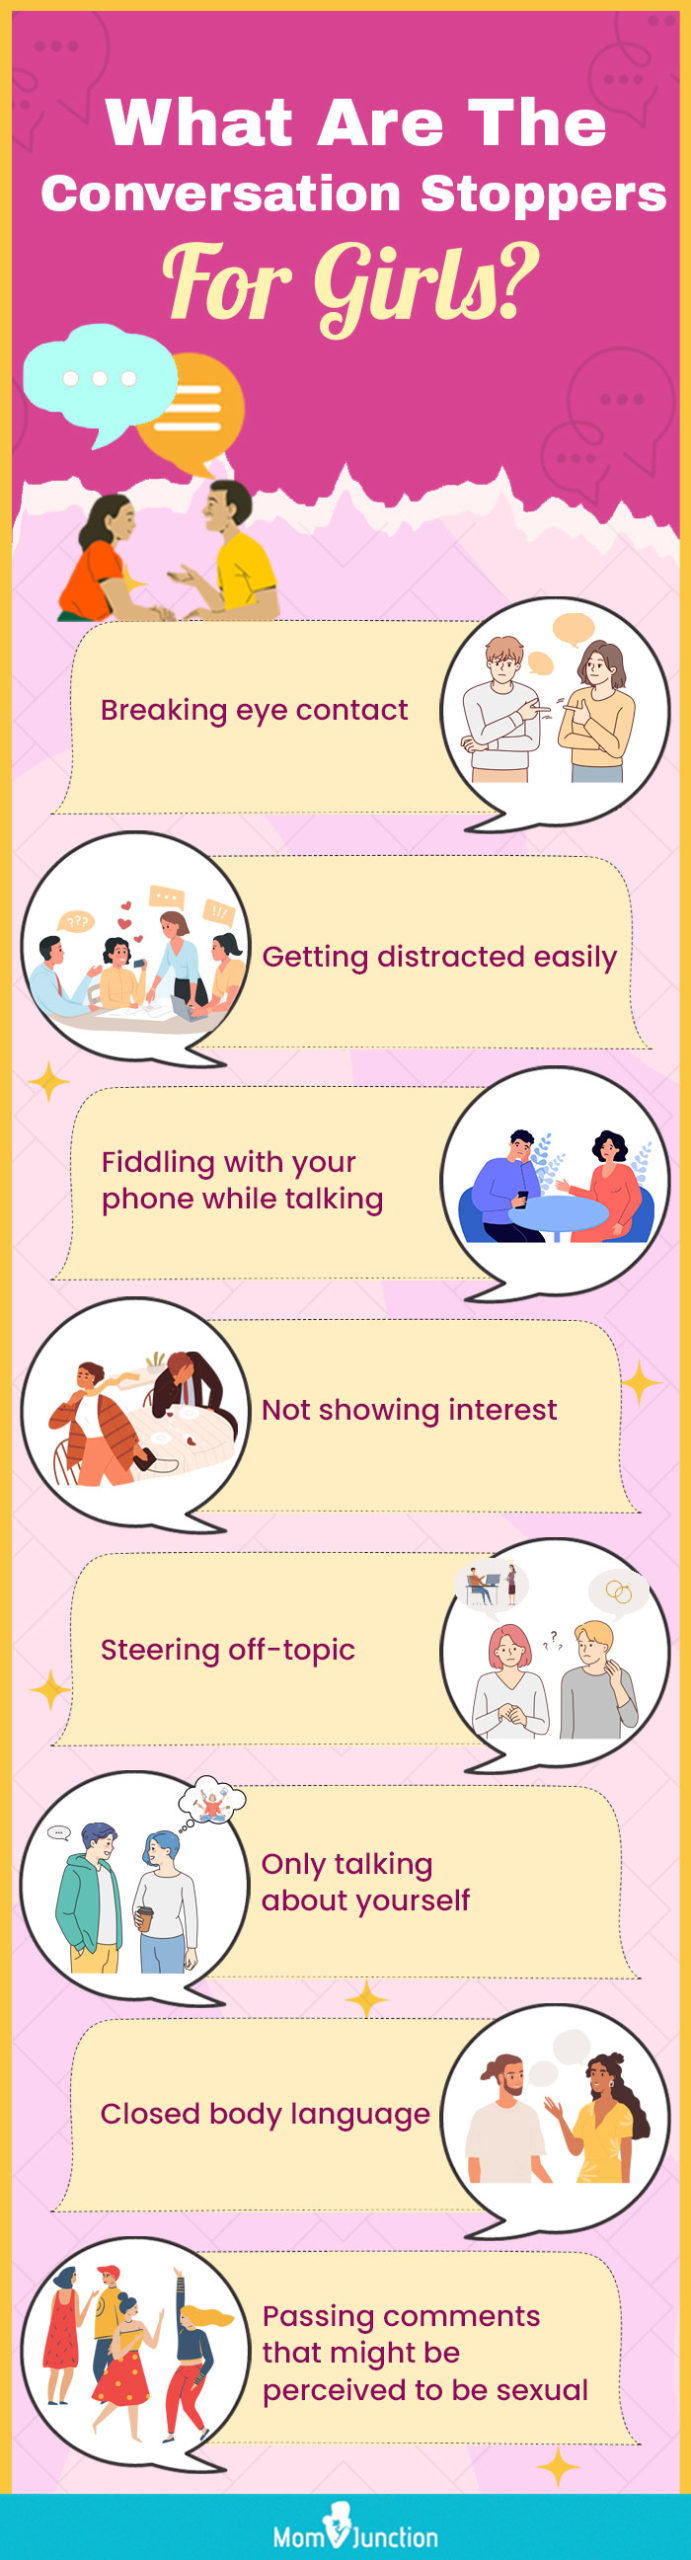 what are the conversation stoppers for girls [infographic]